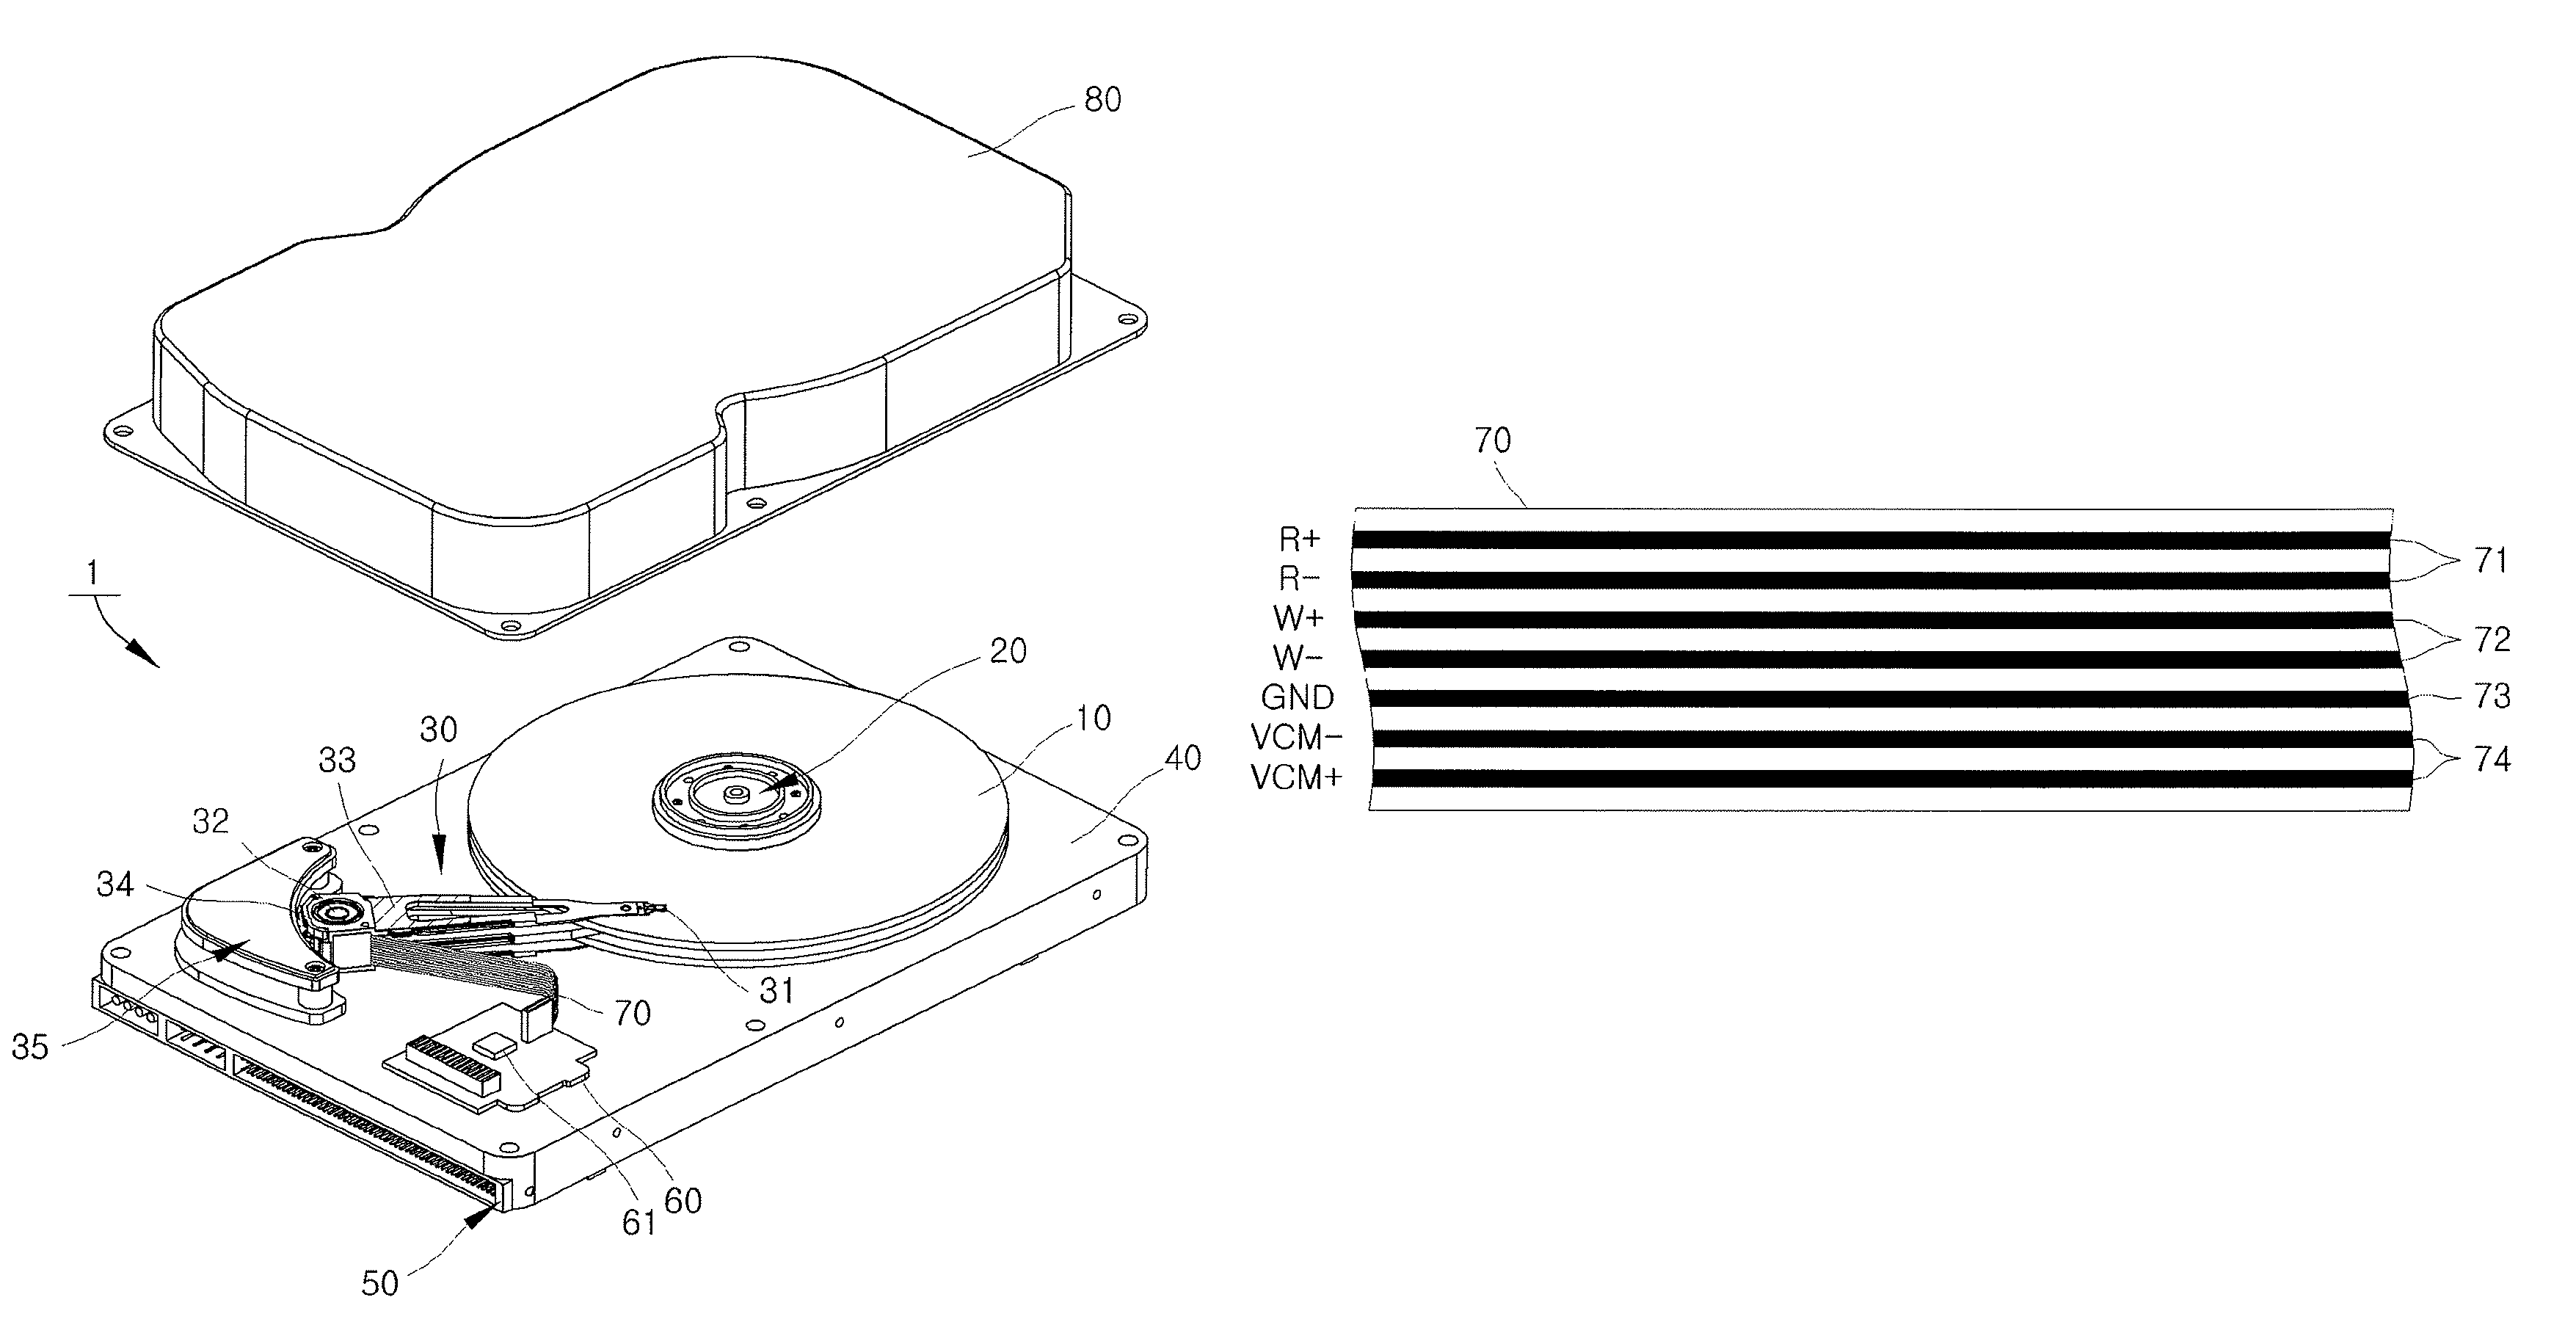 Hard disk drive apparatus having a flexible printed circuit with a plurality of traces in a specified order